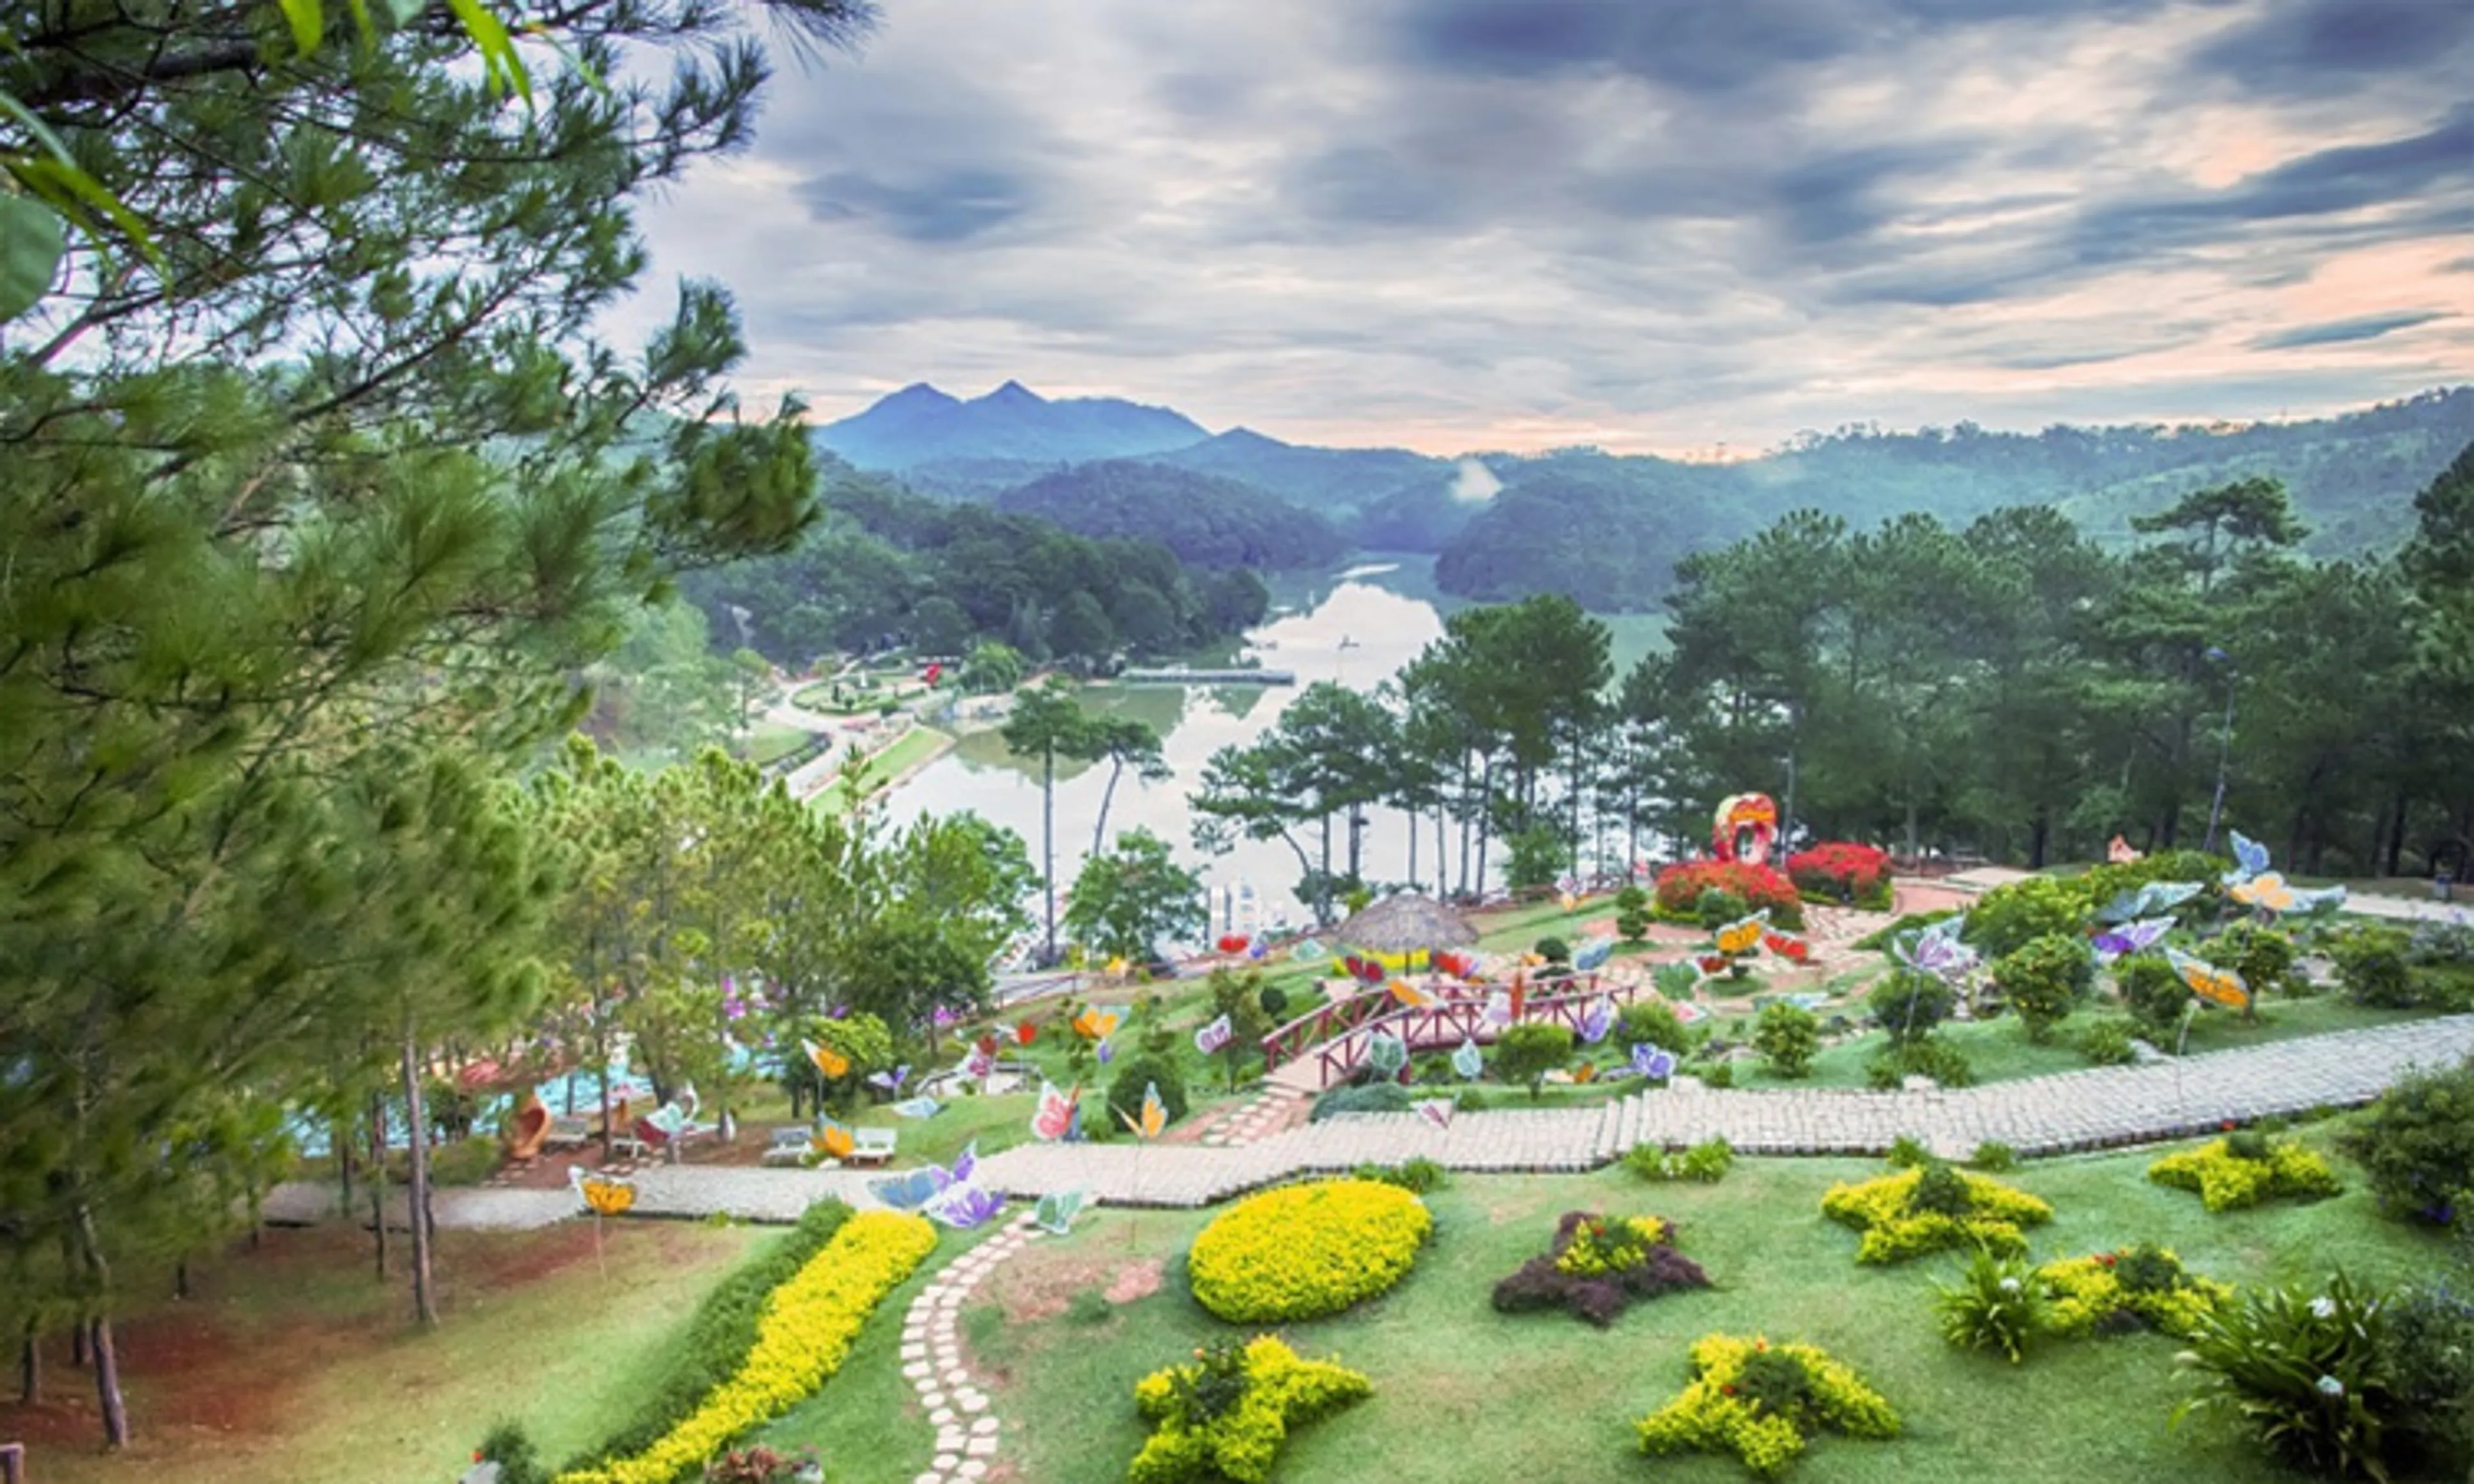 Discover the beauty of Da Lat, the Dreaming City